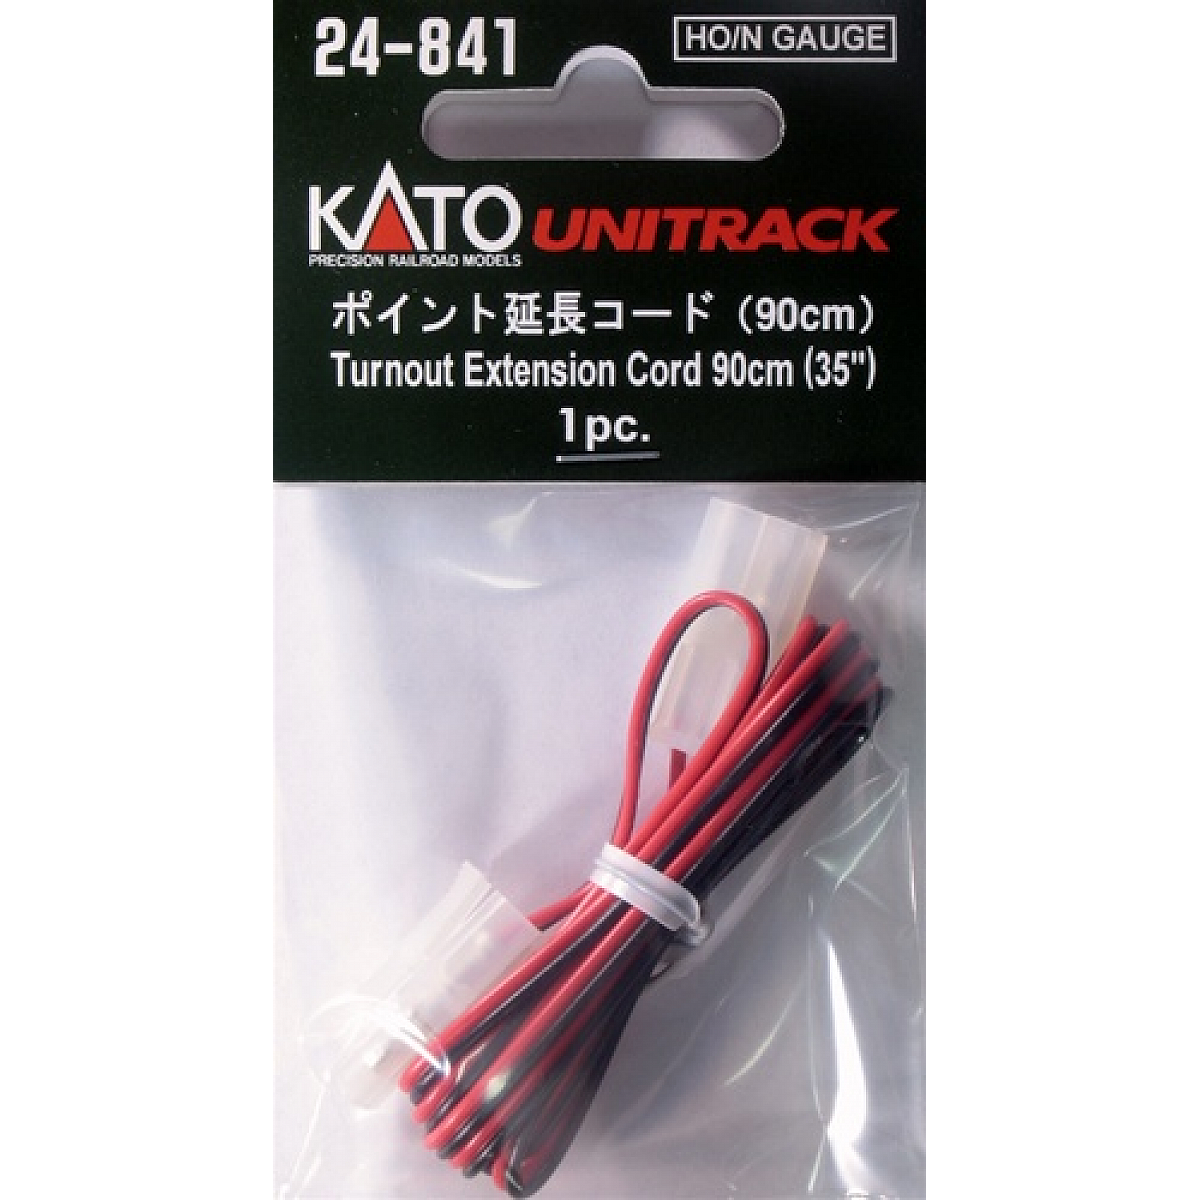 Kato HO/N Scale 35" Turnout Extension Cord #24-841